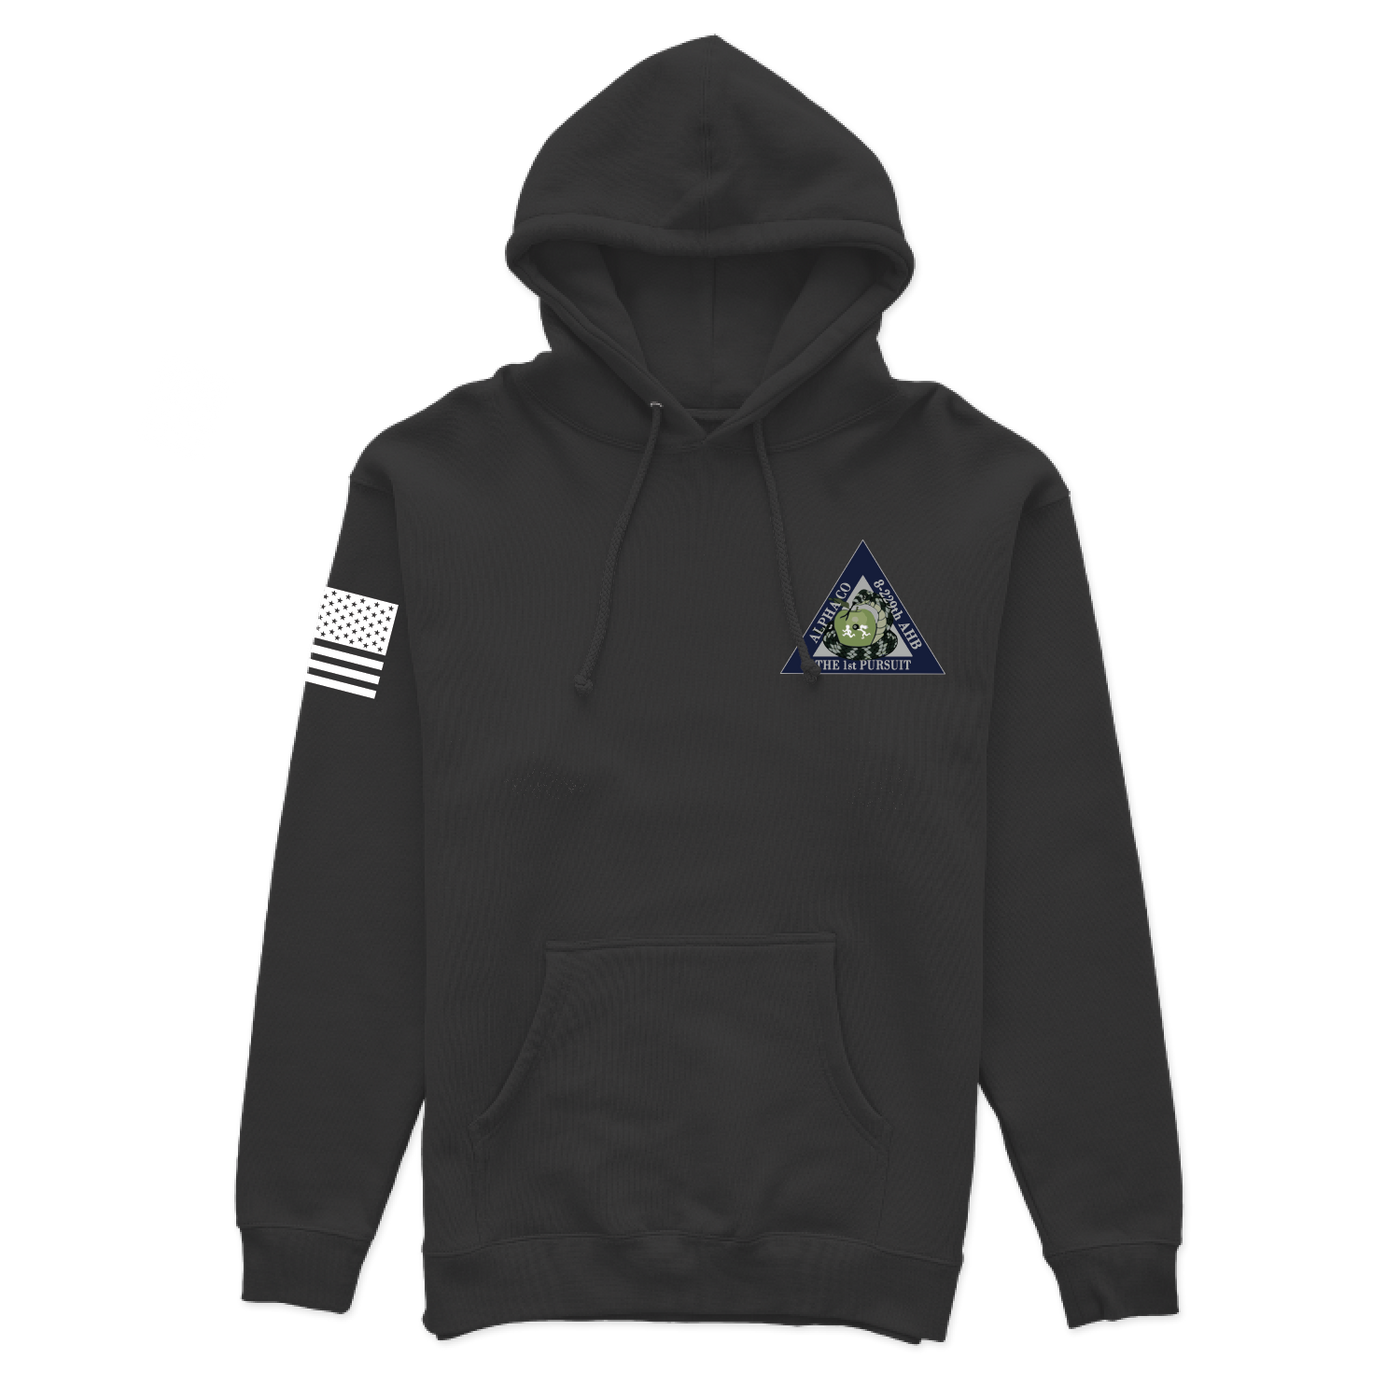 A Co, 8-229 AHB "The 1st Pursuit" Hoodie